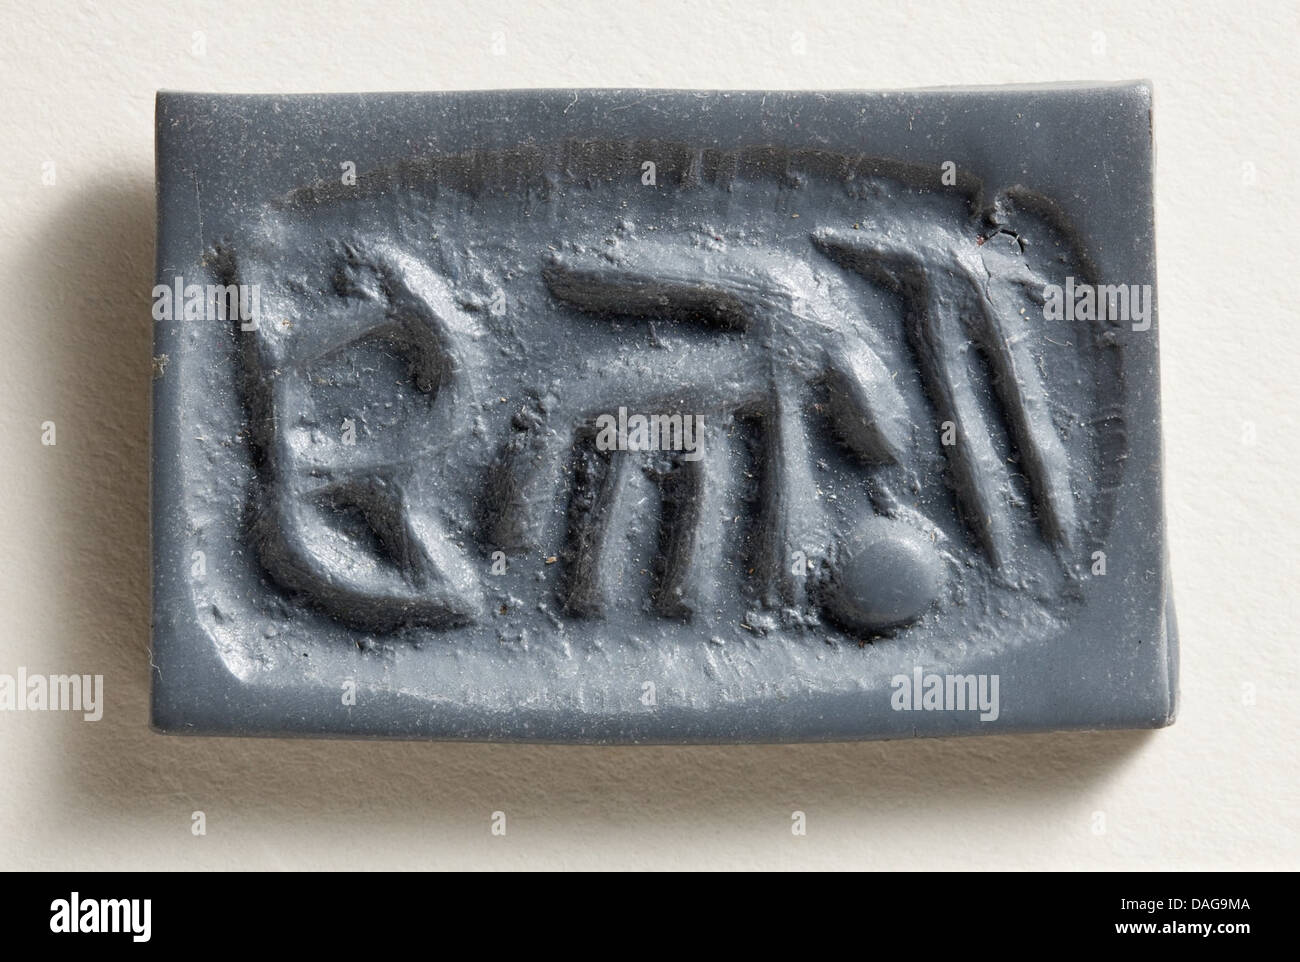 Stamp Seal, Gabled LACMA M.76.174.511 (2 of 2) Stock Photo